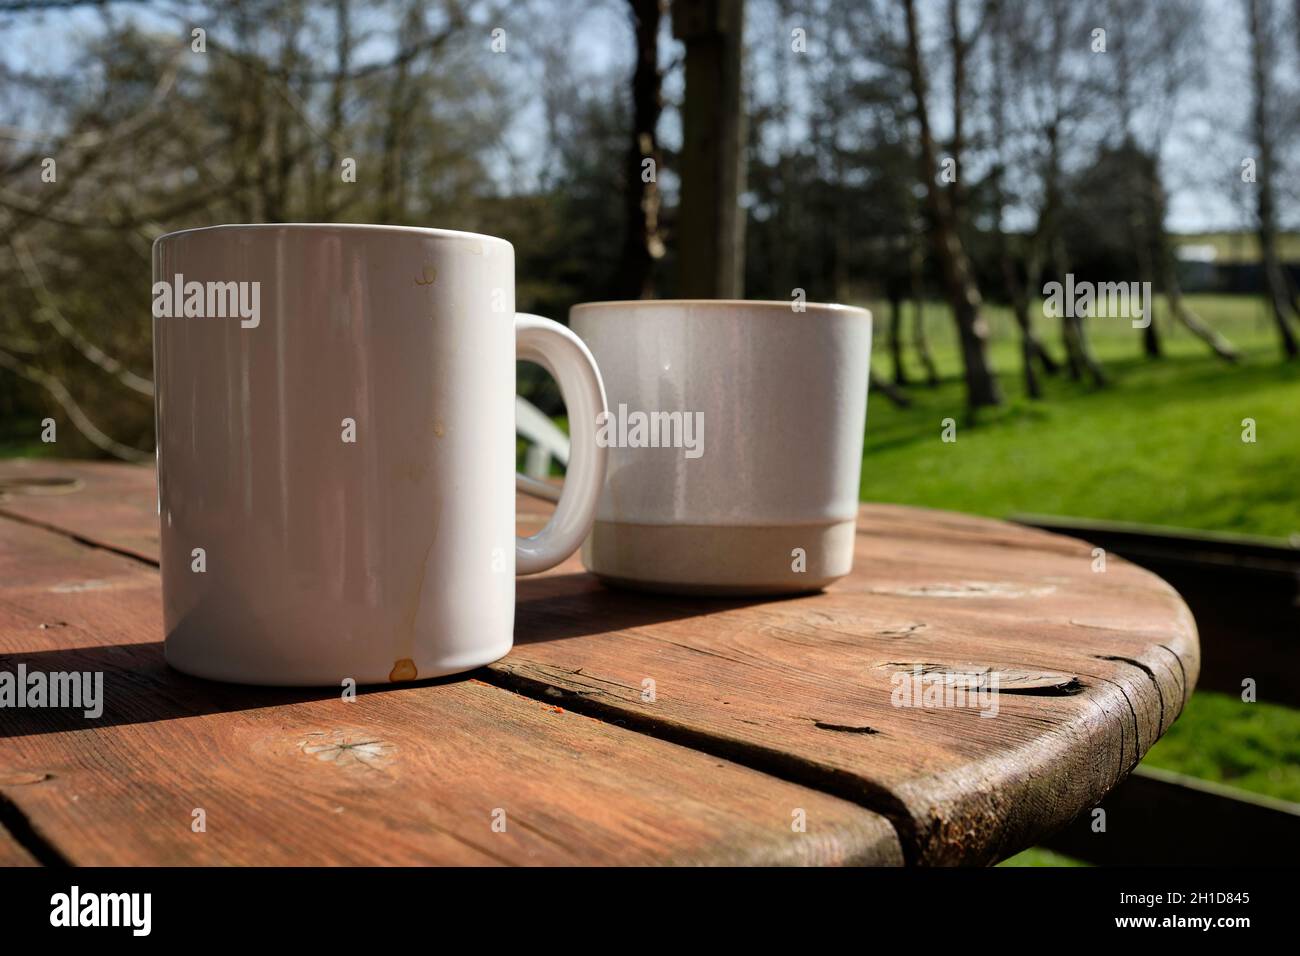 Two mugs on an outdoor wooden table Stock Photo